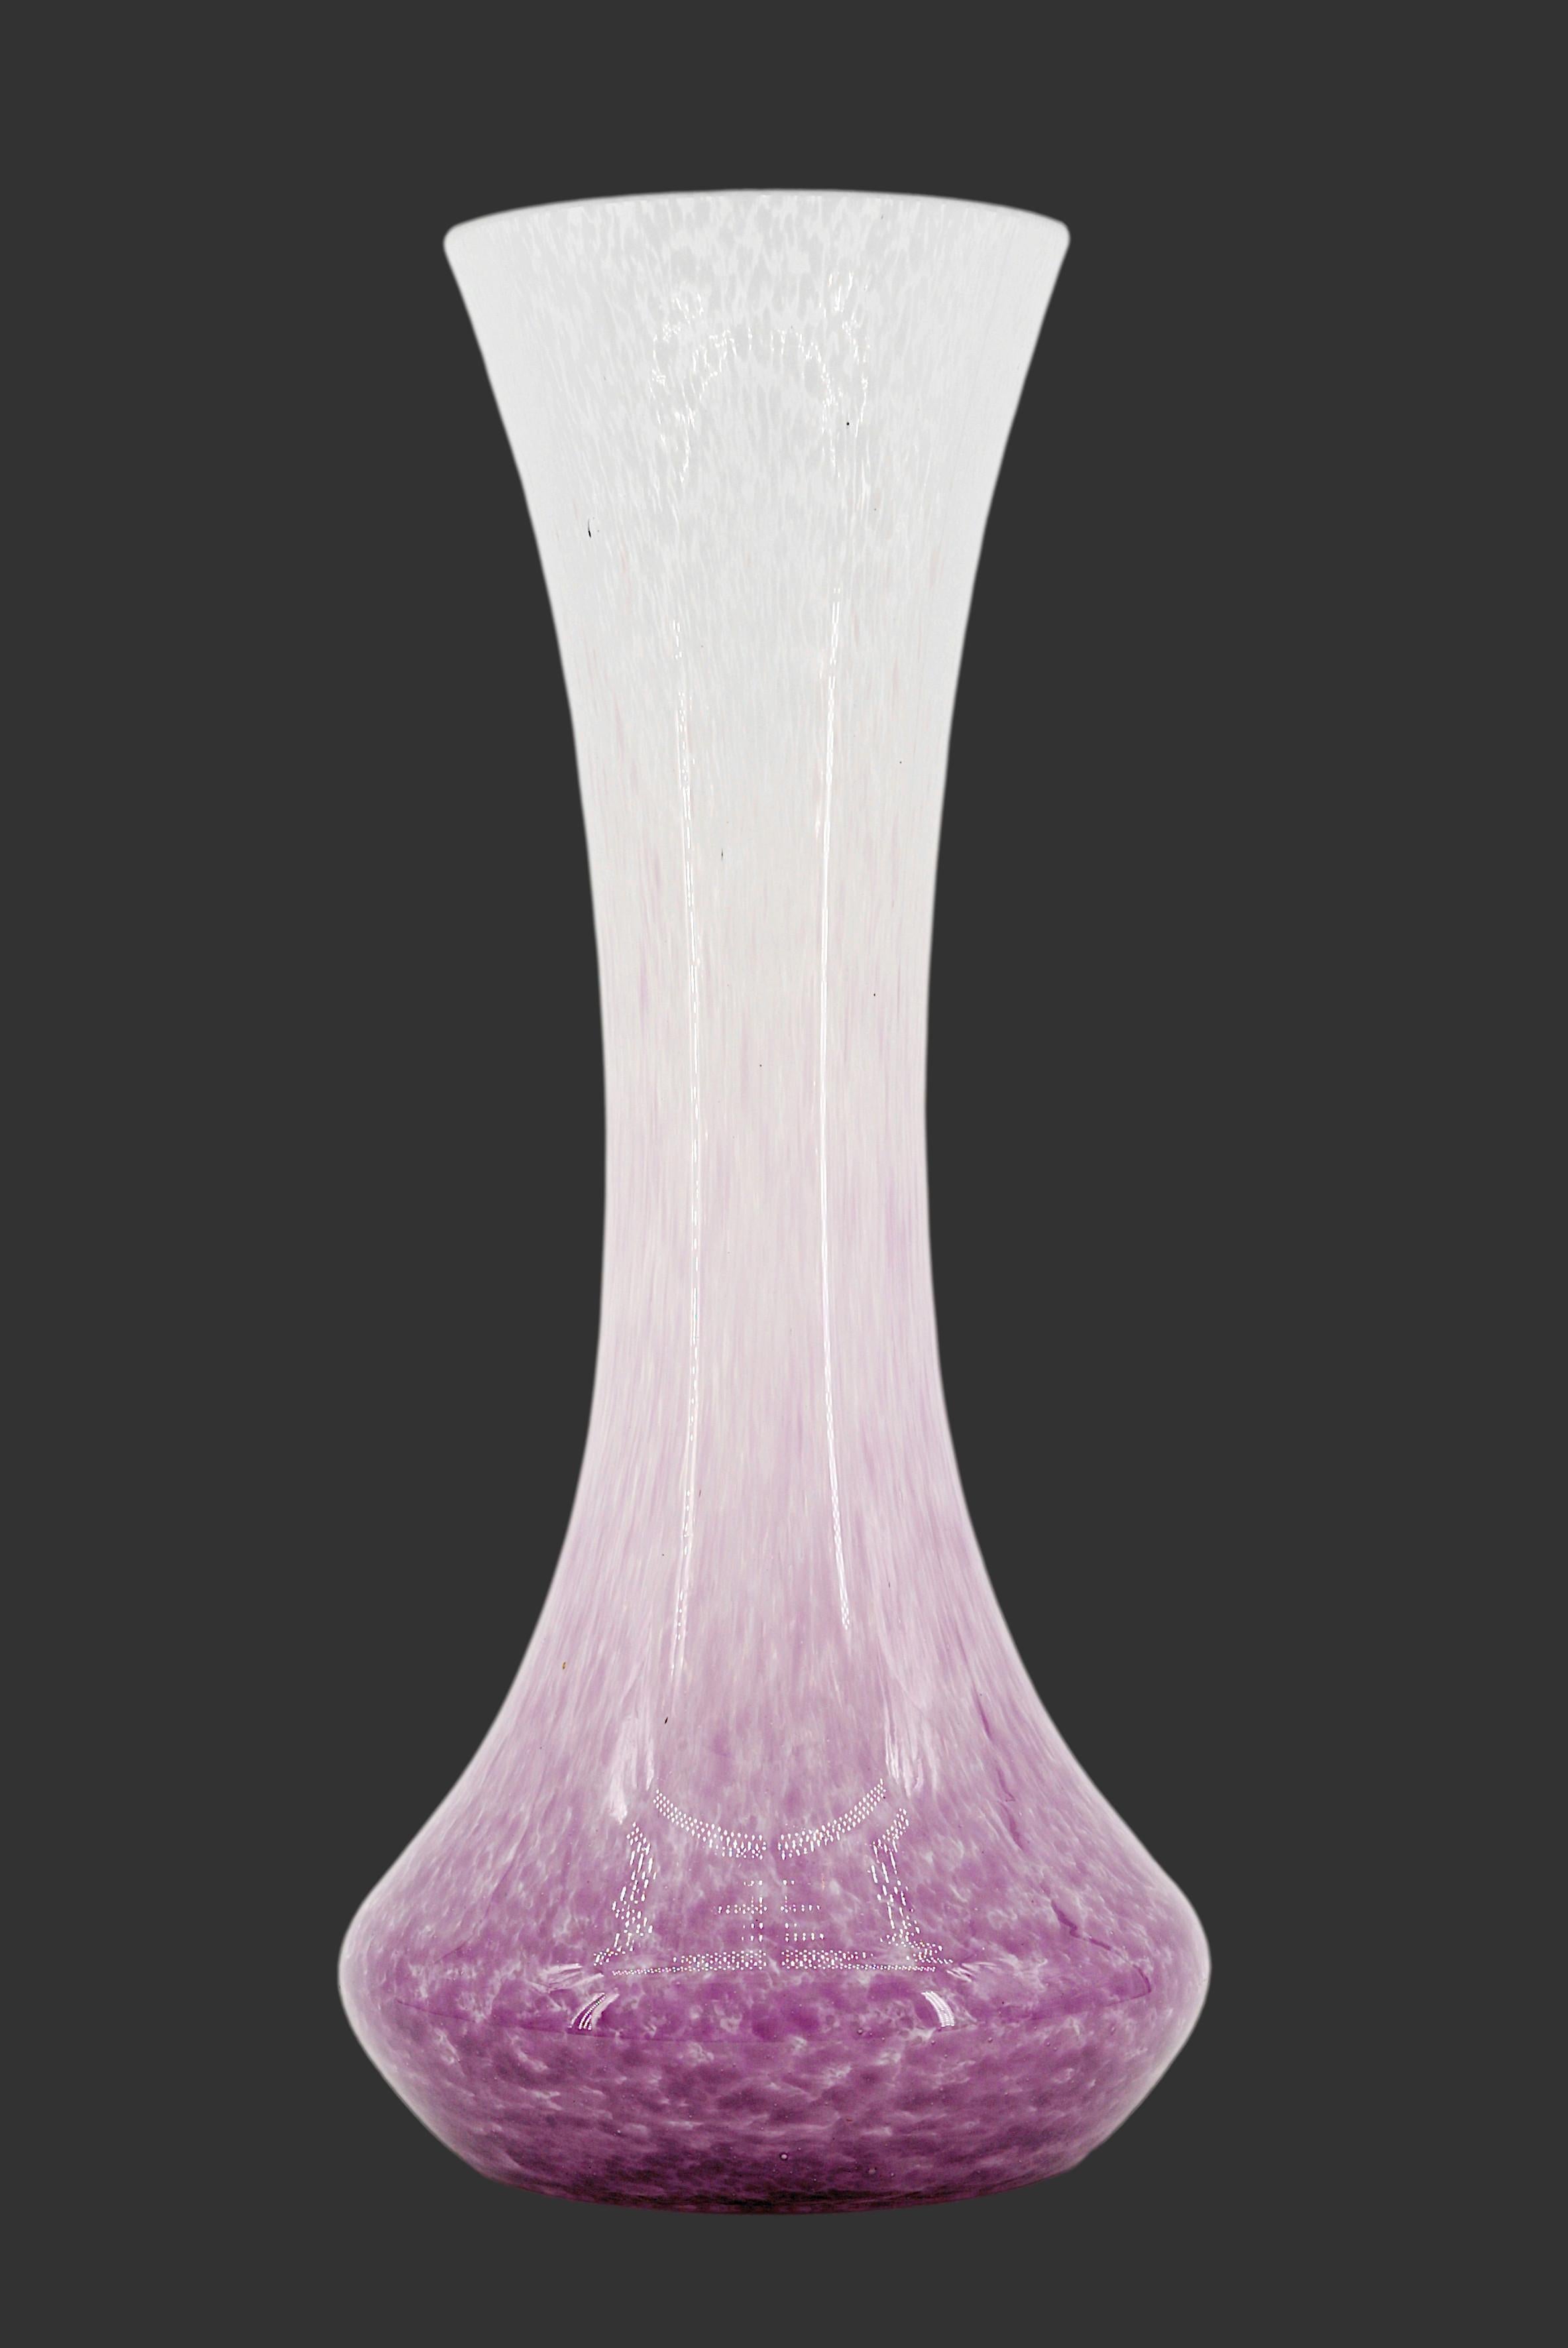 French Art Deco vase by Andre DELATTE (Jarville, near Nancy), France, late 1920s. Mottled glass. Double glass. Purple and white enamels are applied between the two layers. Height : 13.8